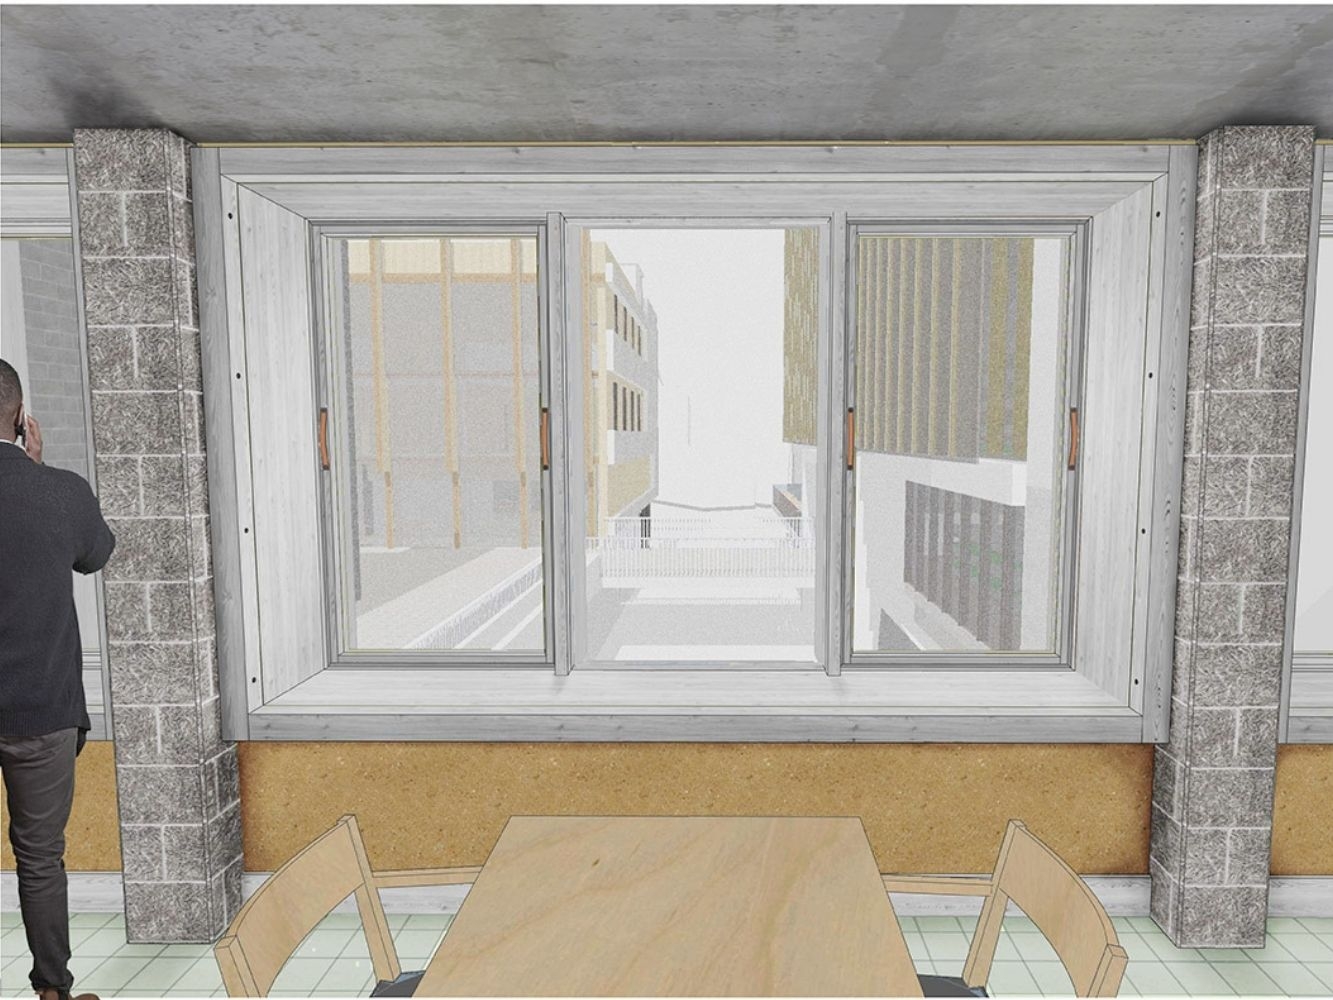 Architectural rendering of reimaging of Queen Street Police Station as a Sustainability Hub, interior window